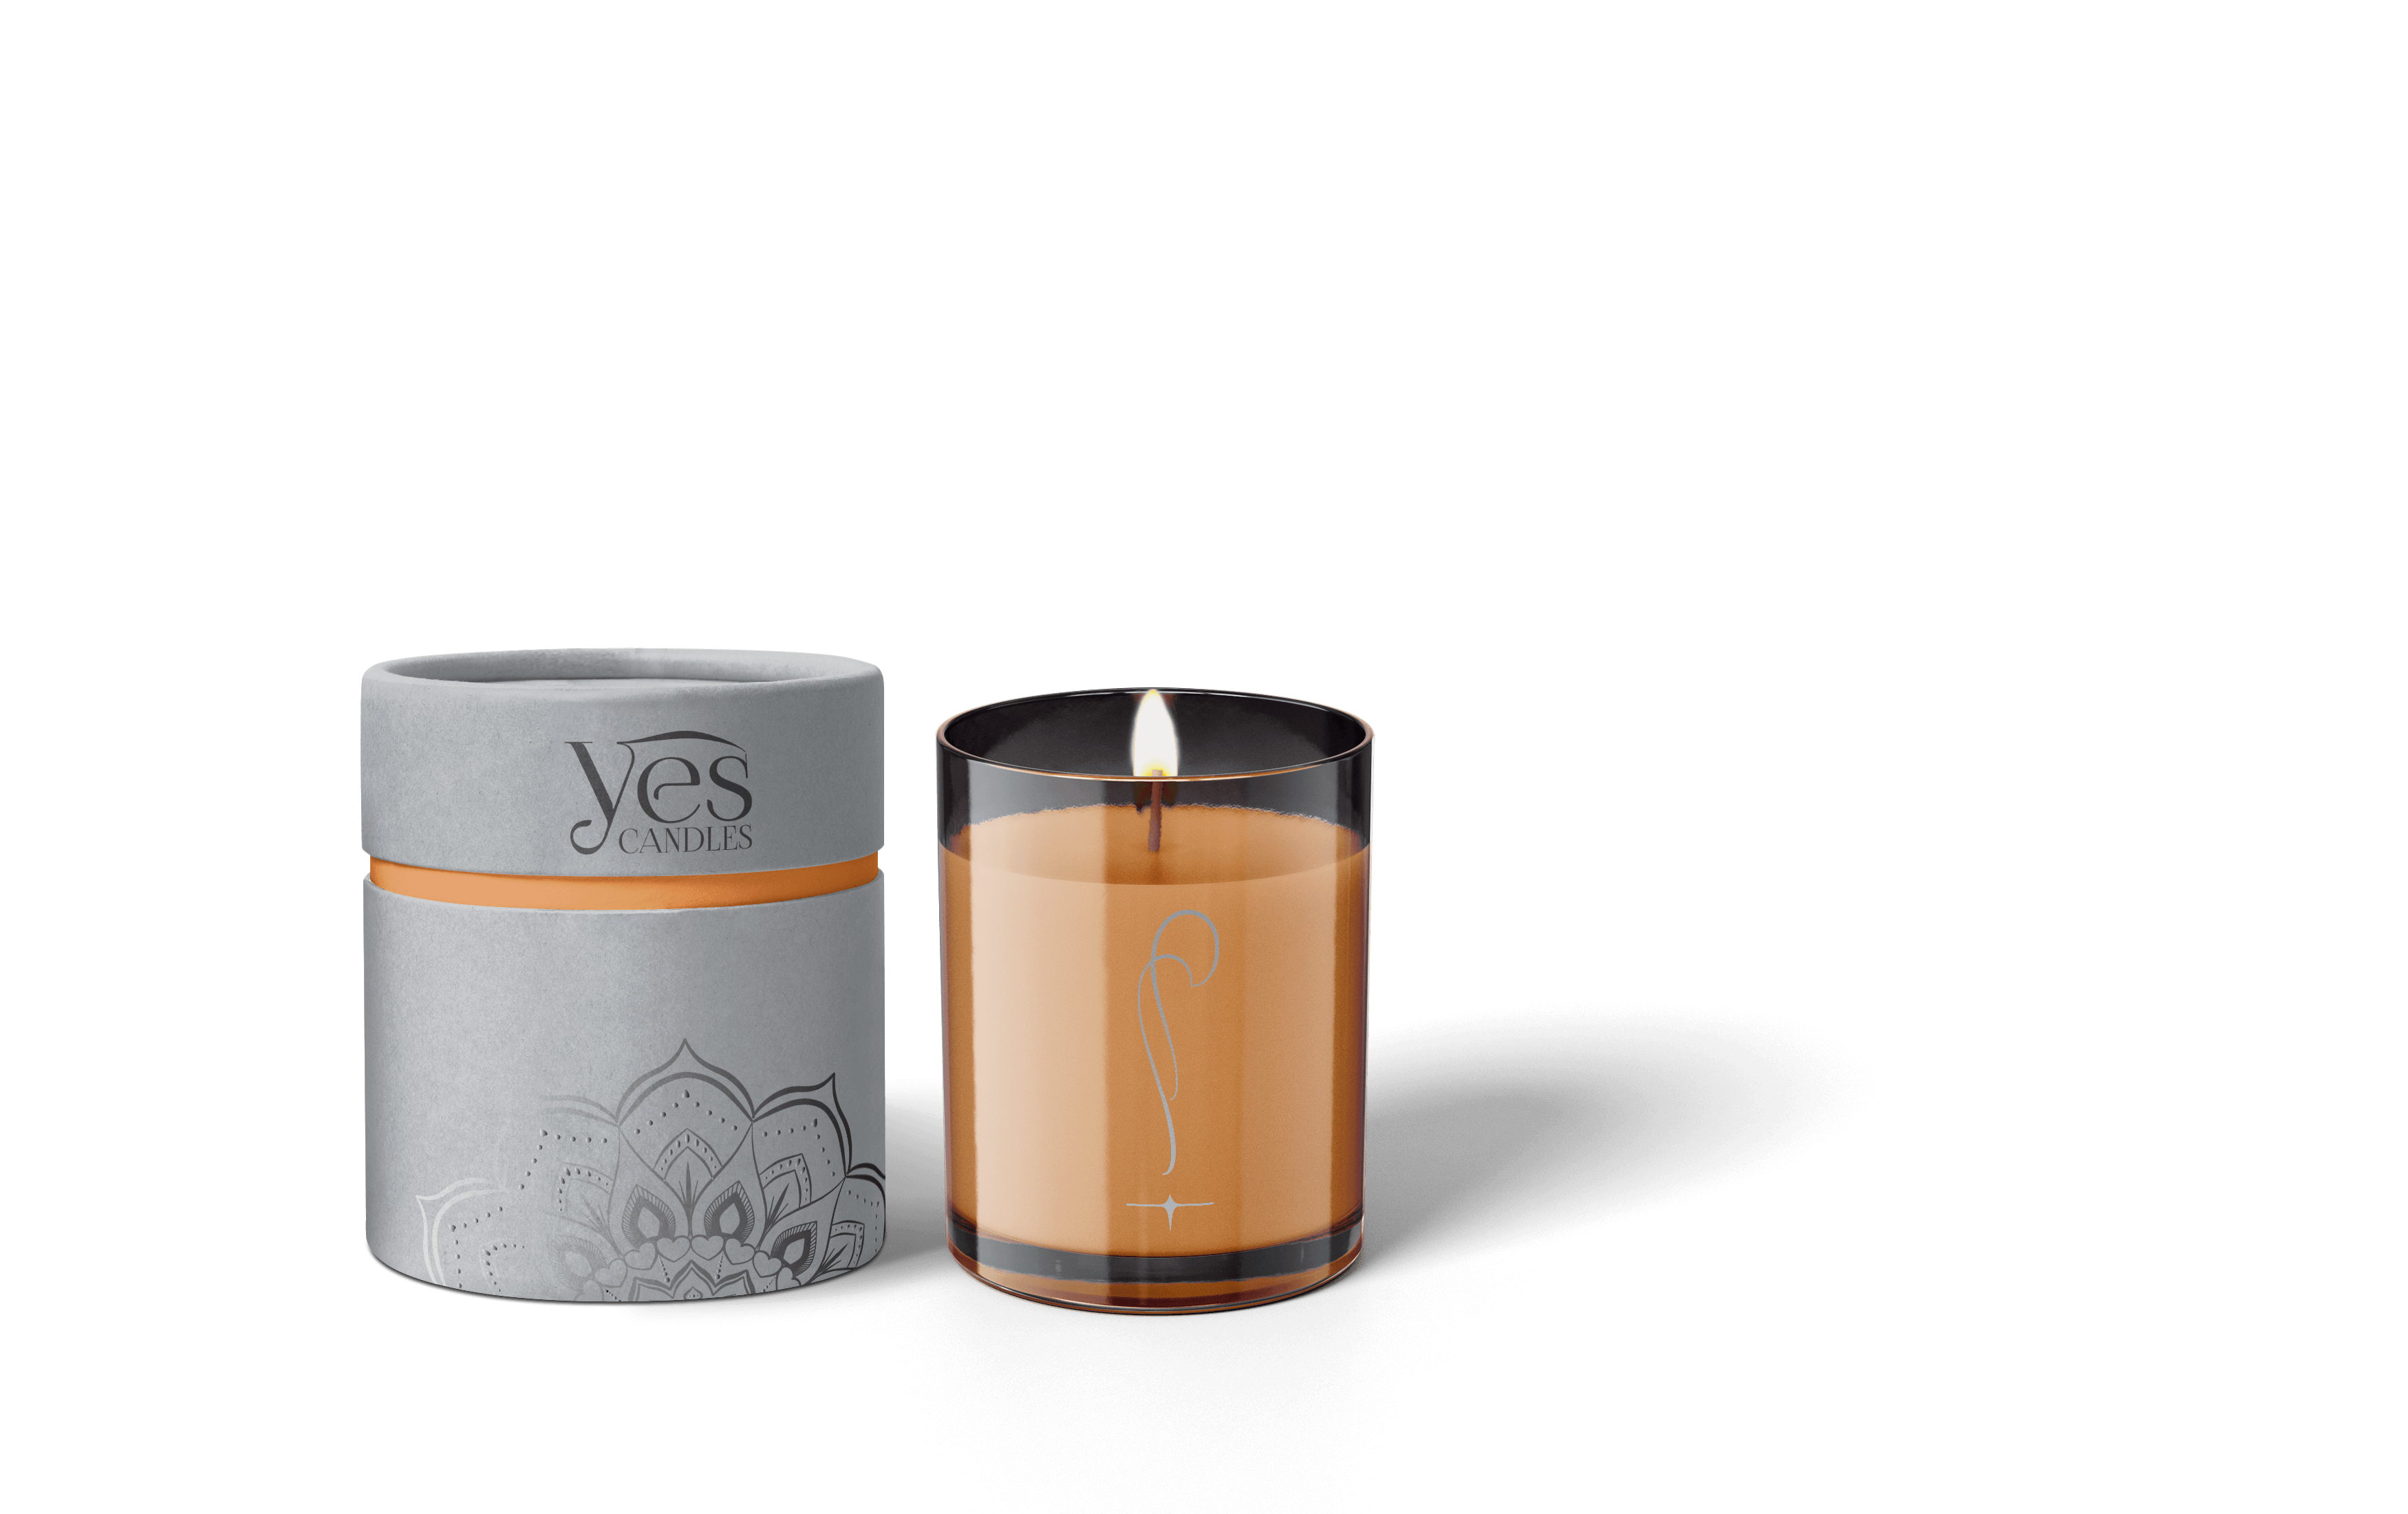 Gingerbread scented candle